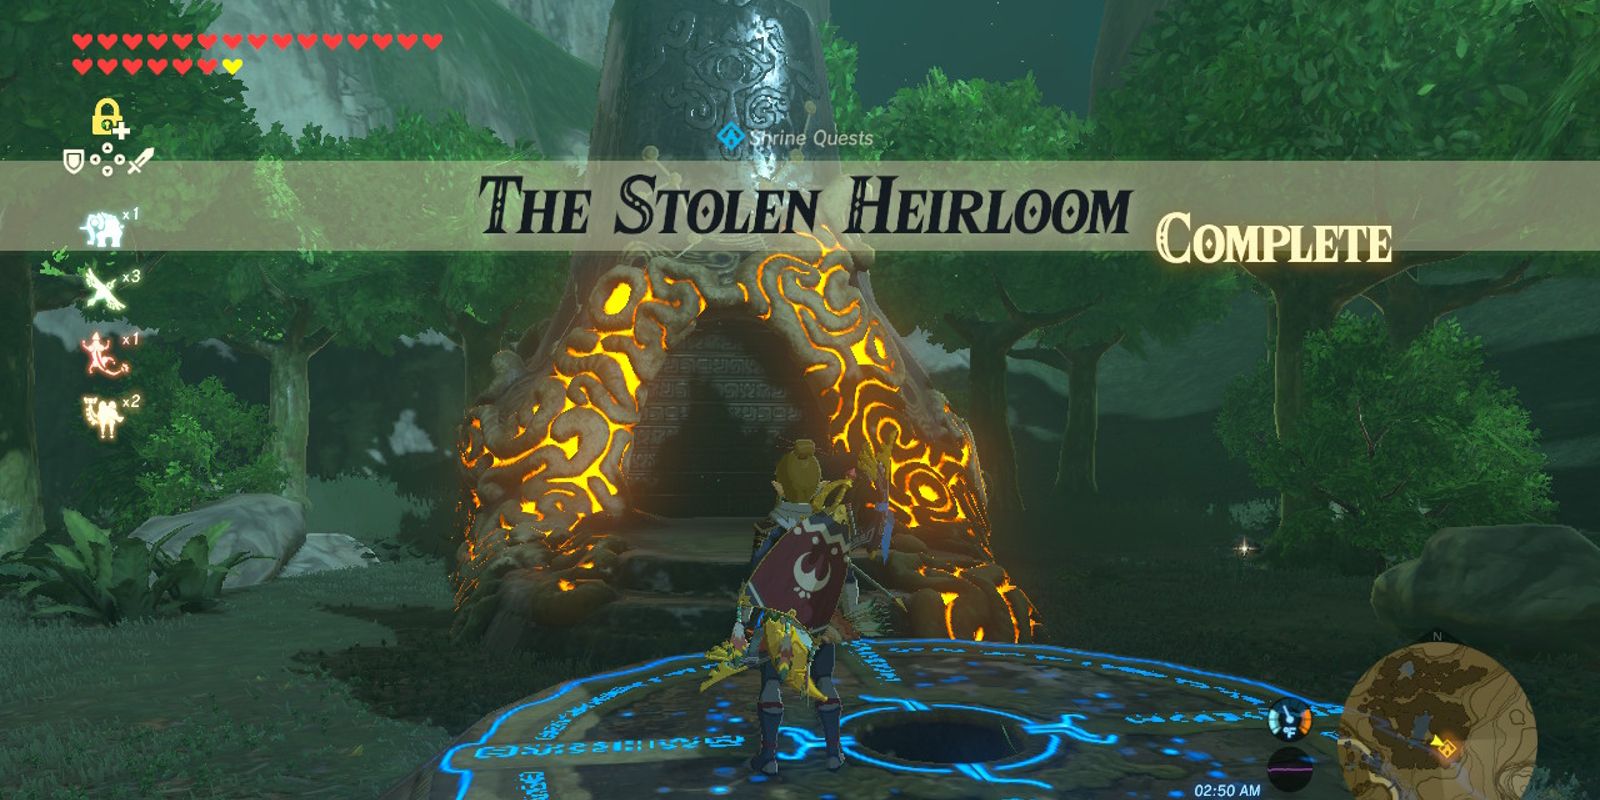 Completing The Stolen Heirloom Shrine Quest in Breath of the Wild will unlock the Lanka Rokee Shrine.